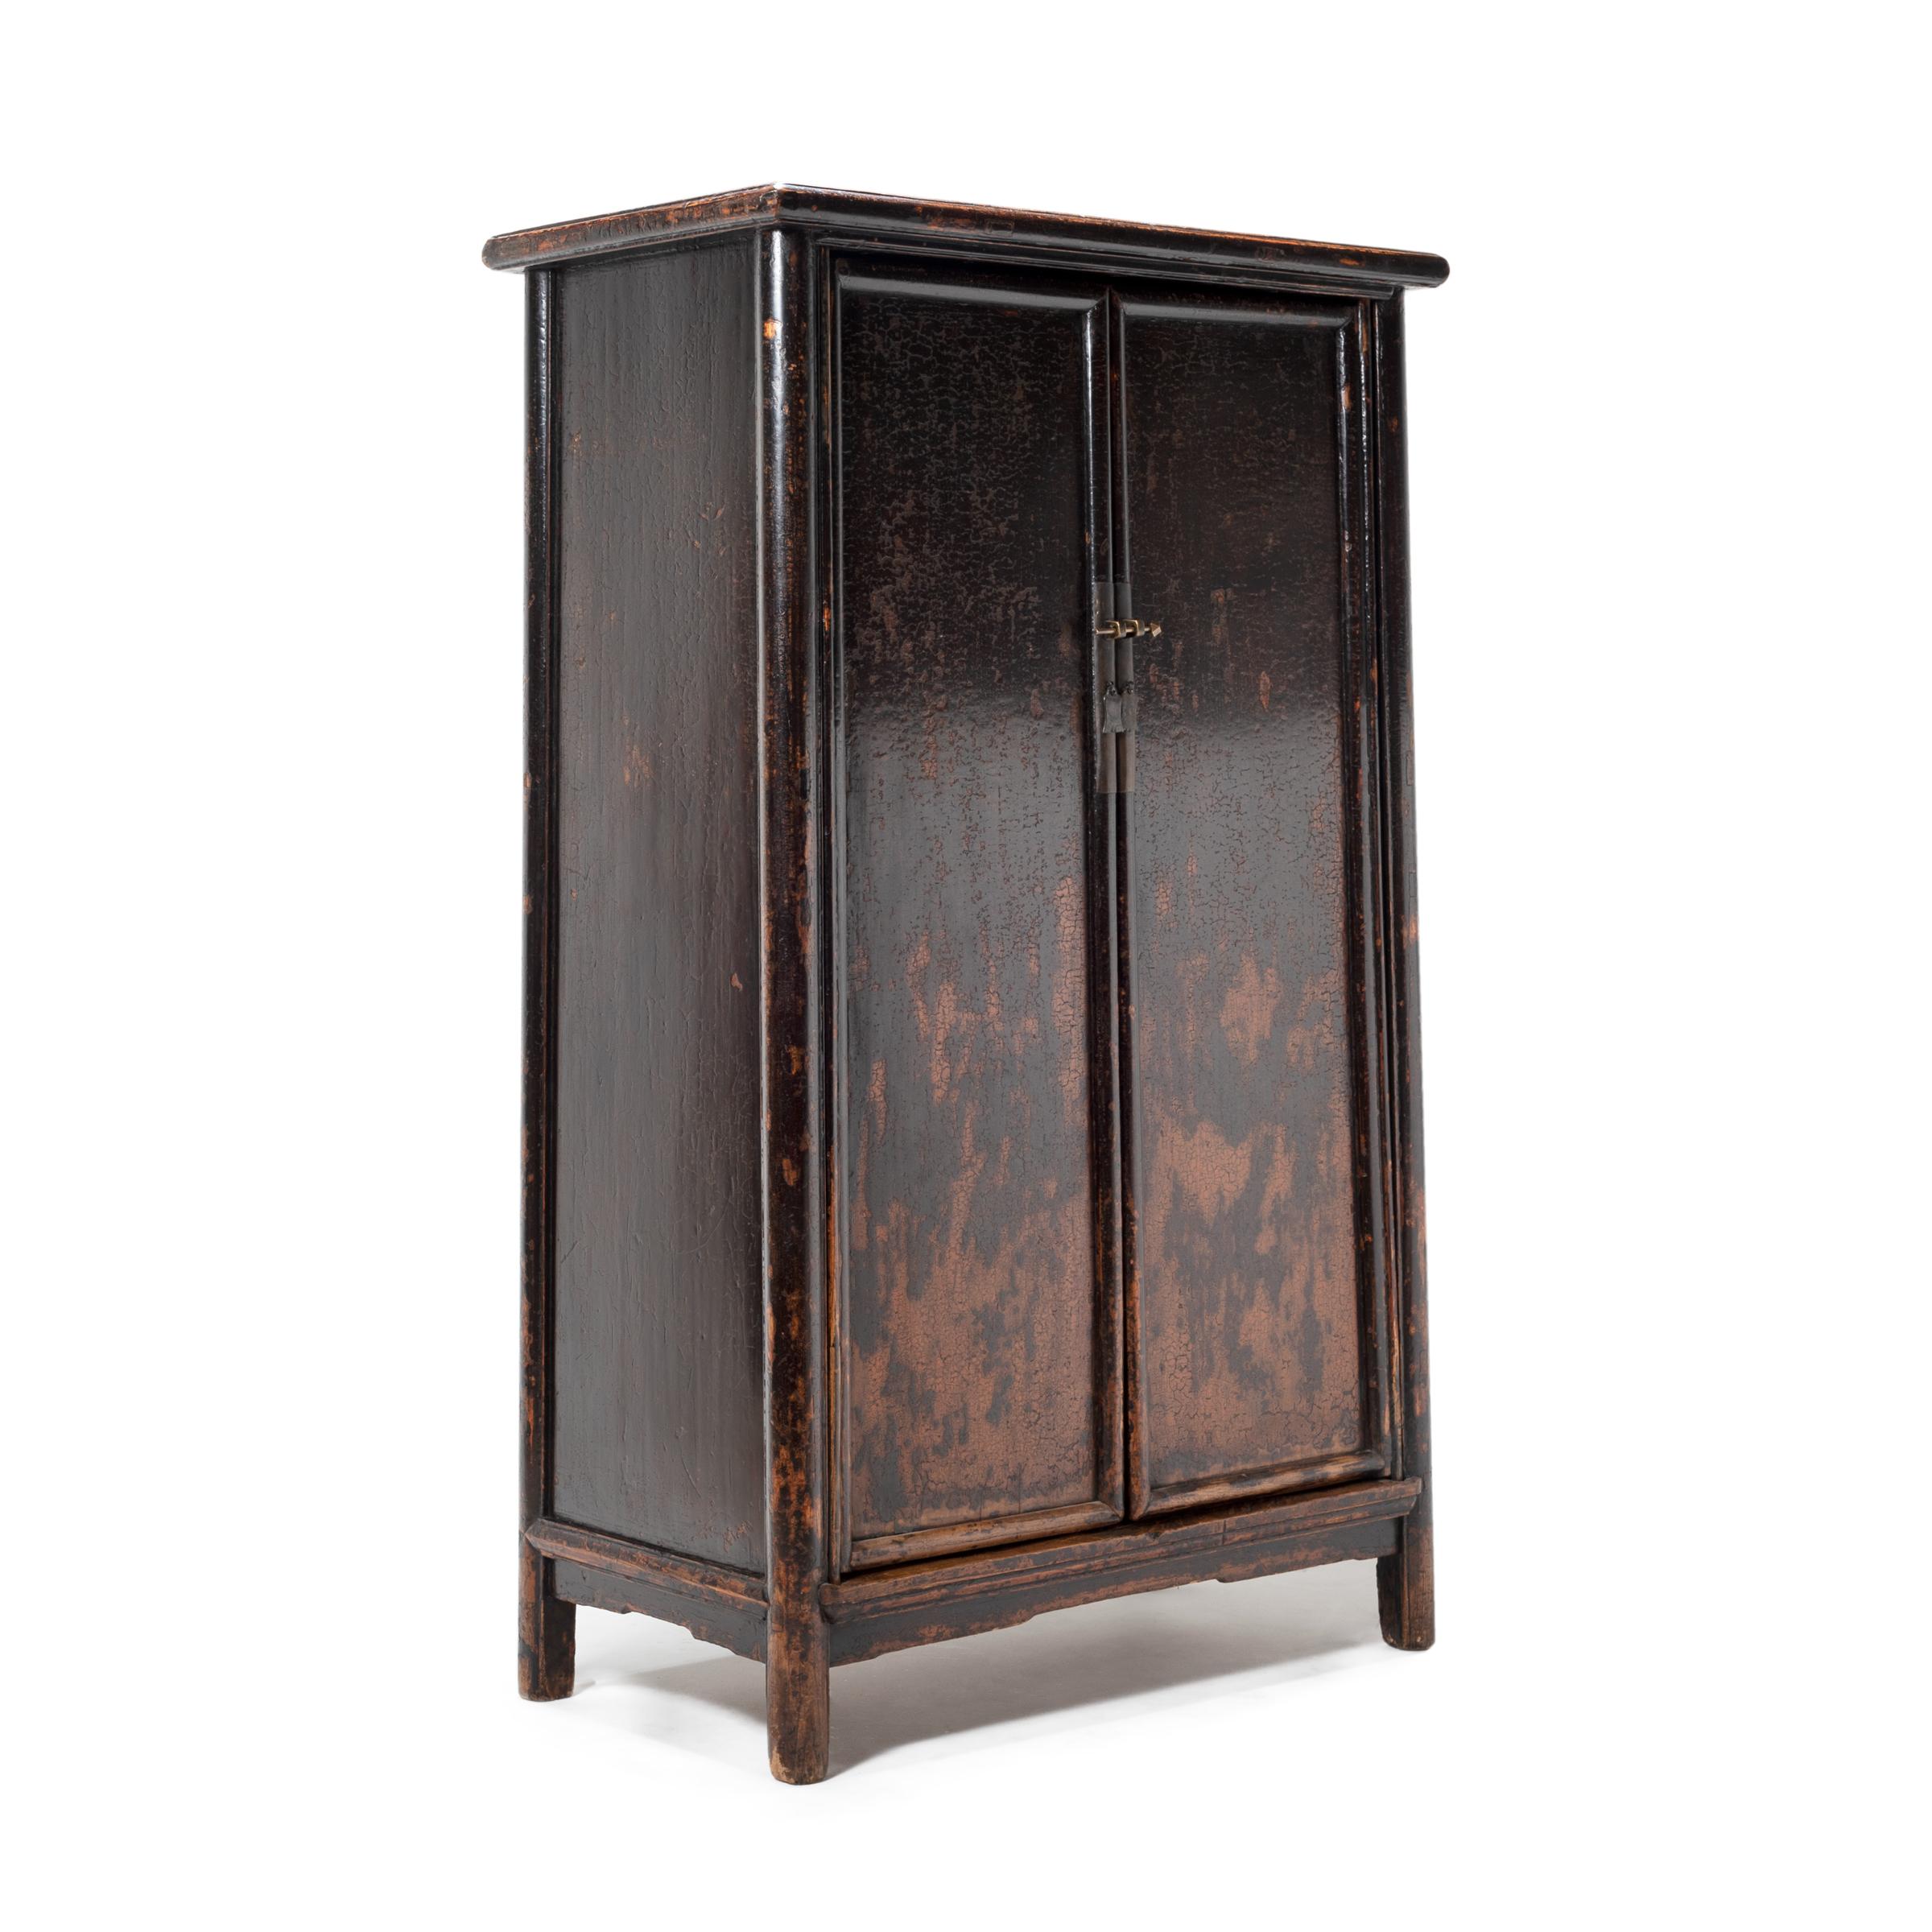 Chinese Crackled Lacquer Tapered Cabinet, c. 1750 In Good Condition For Sale In Chicago, IL